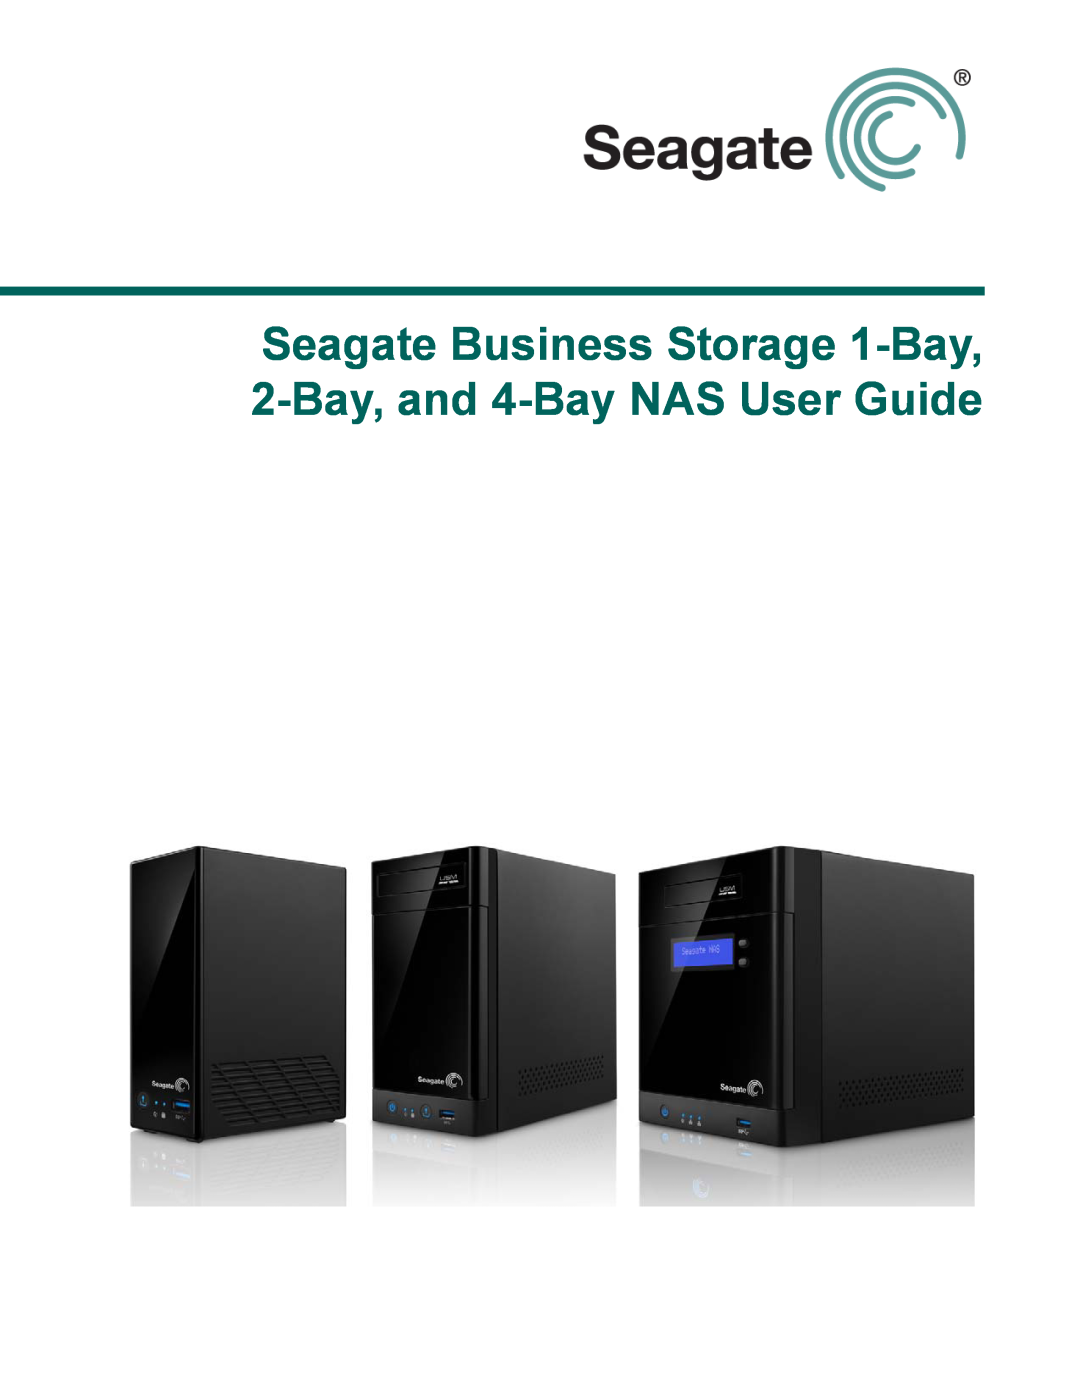 Seagate STBP100, STBM3000100, STBM2000100 manual Seagate Business Storage 1-Bay, 2-Bay, and 4-Bay NAS User Guide 